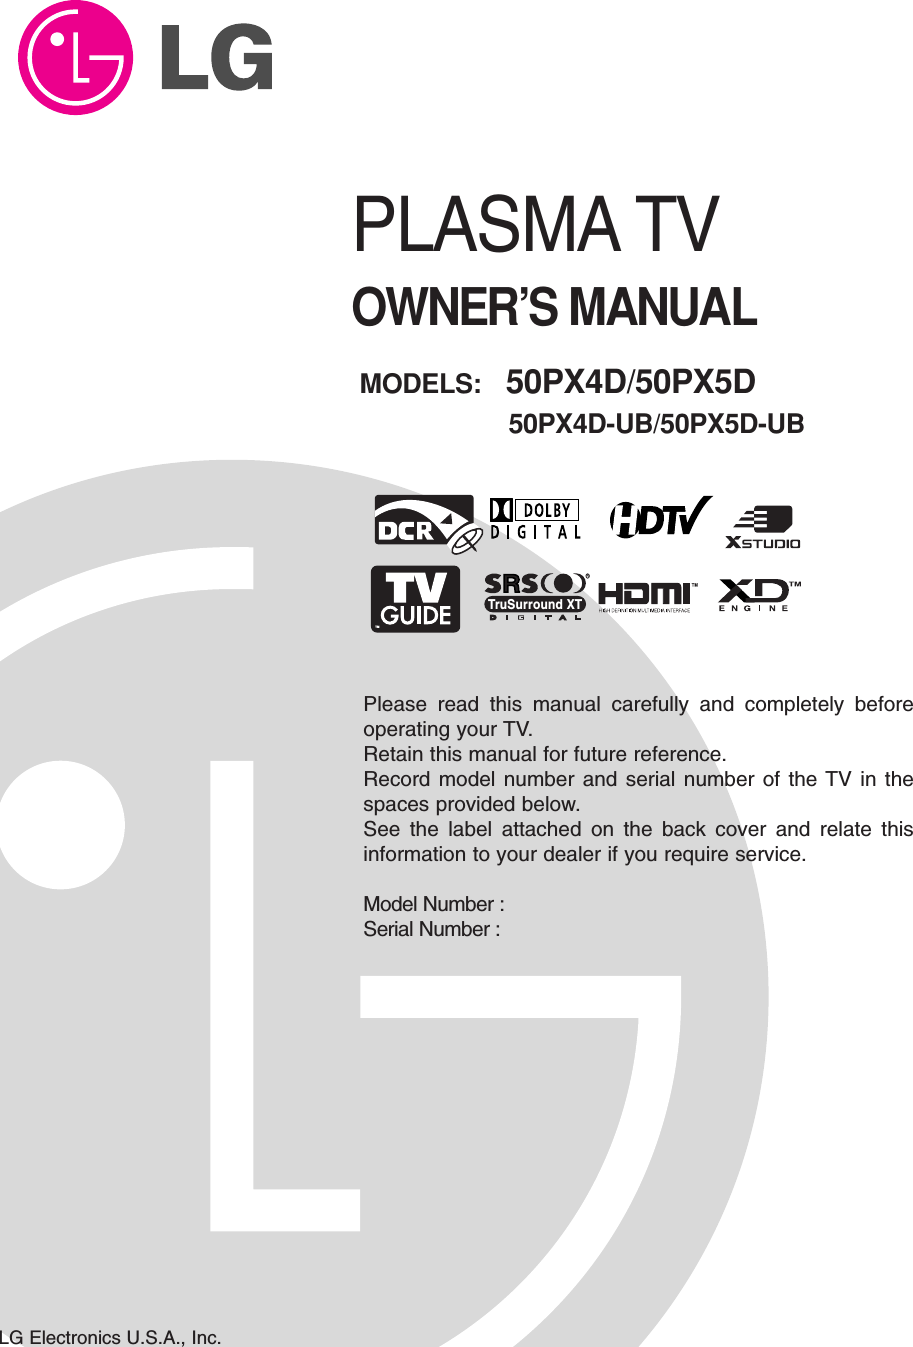 Please read this manual carefully and completely beforeoperating your TV. Retain this manual for future reference.Record model number and serial number of the TV in thespaces provided below. See the label attached on the back cover and relate thisinformation to your dealer if you require service.Model Number : Serial Number : MODELS: 50PX4D/50PX5D50PX4D-UB/50PX5D-UBLG Electronics U.S.A., Inc.TMRTruSurround XTPLASMA TVOWNER’S MANUAL